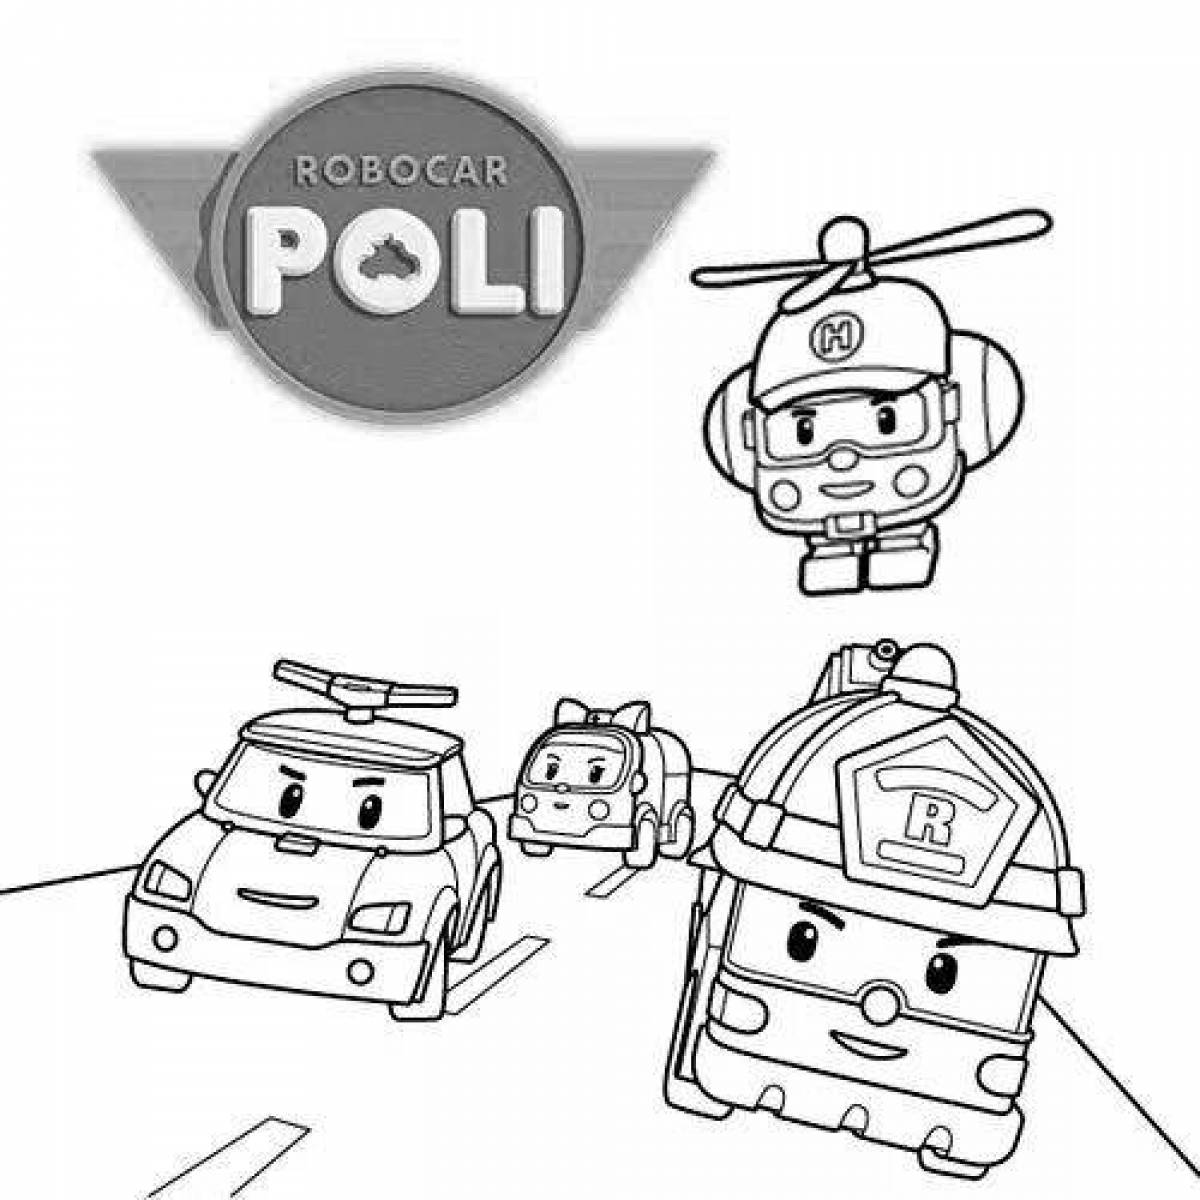 Grand Robocar Poly Coloring Page